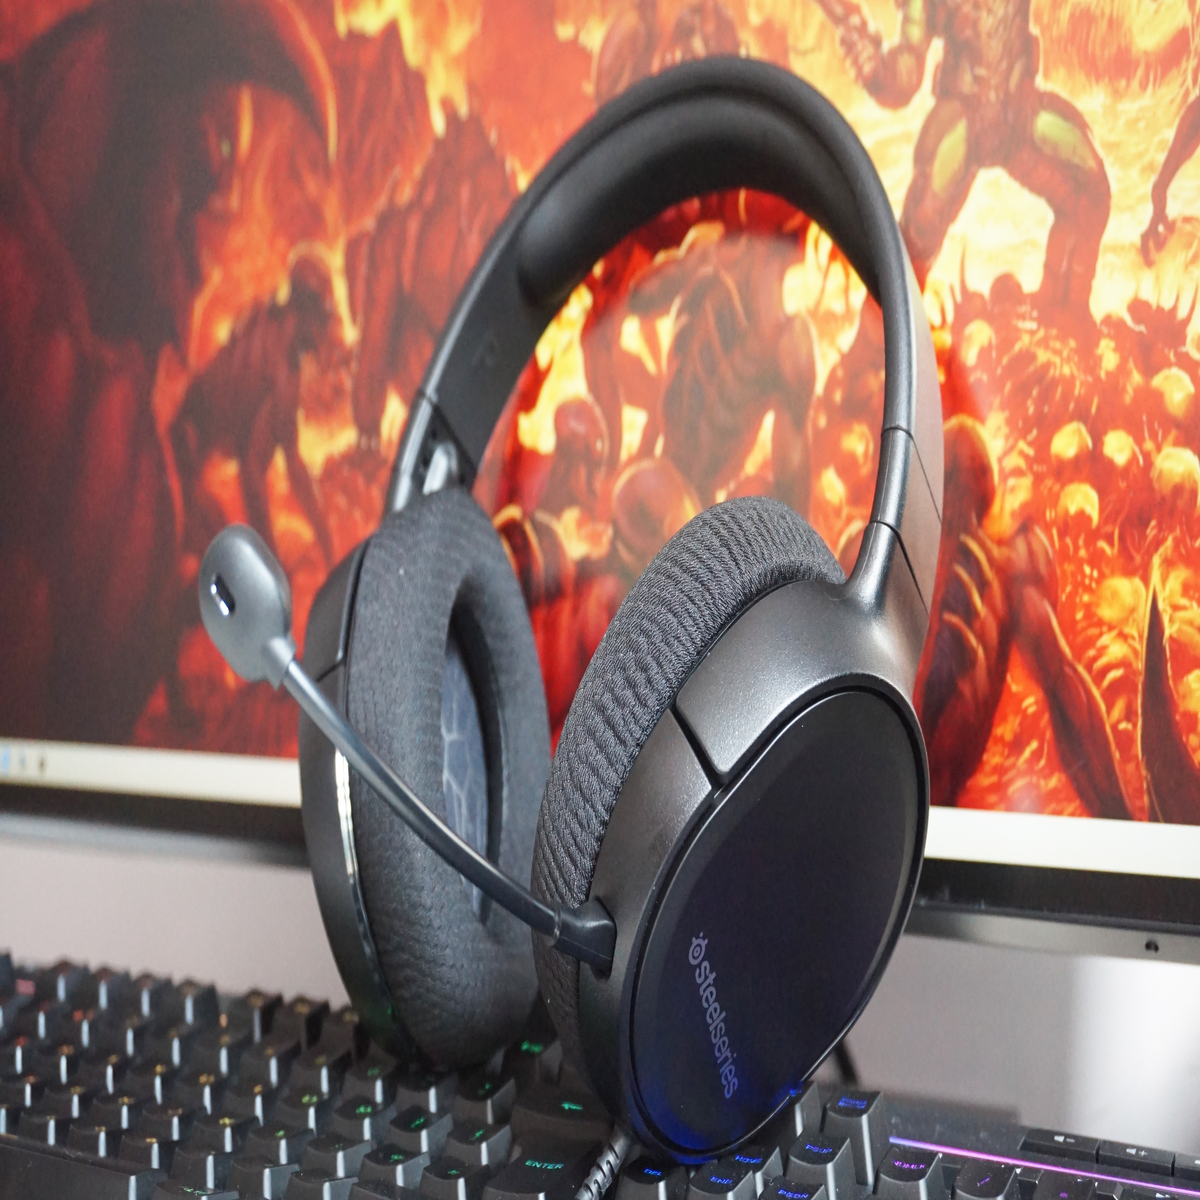 SteelSeries Arctis 1 Headset Review: Comfortable, Breathable